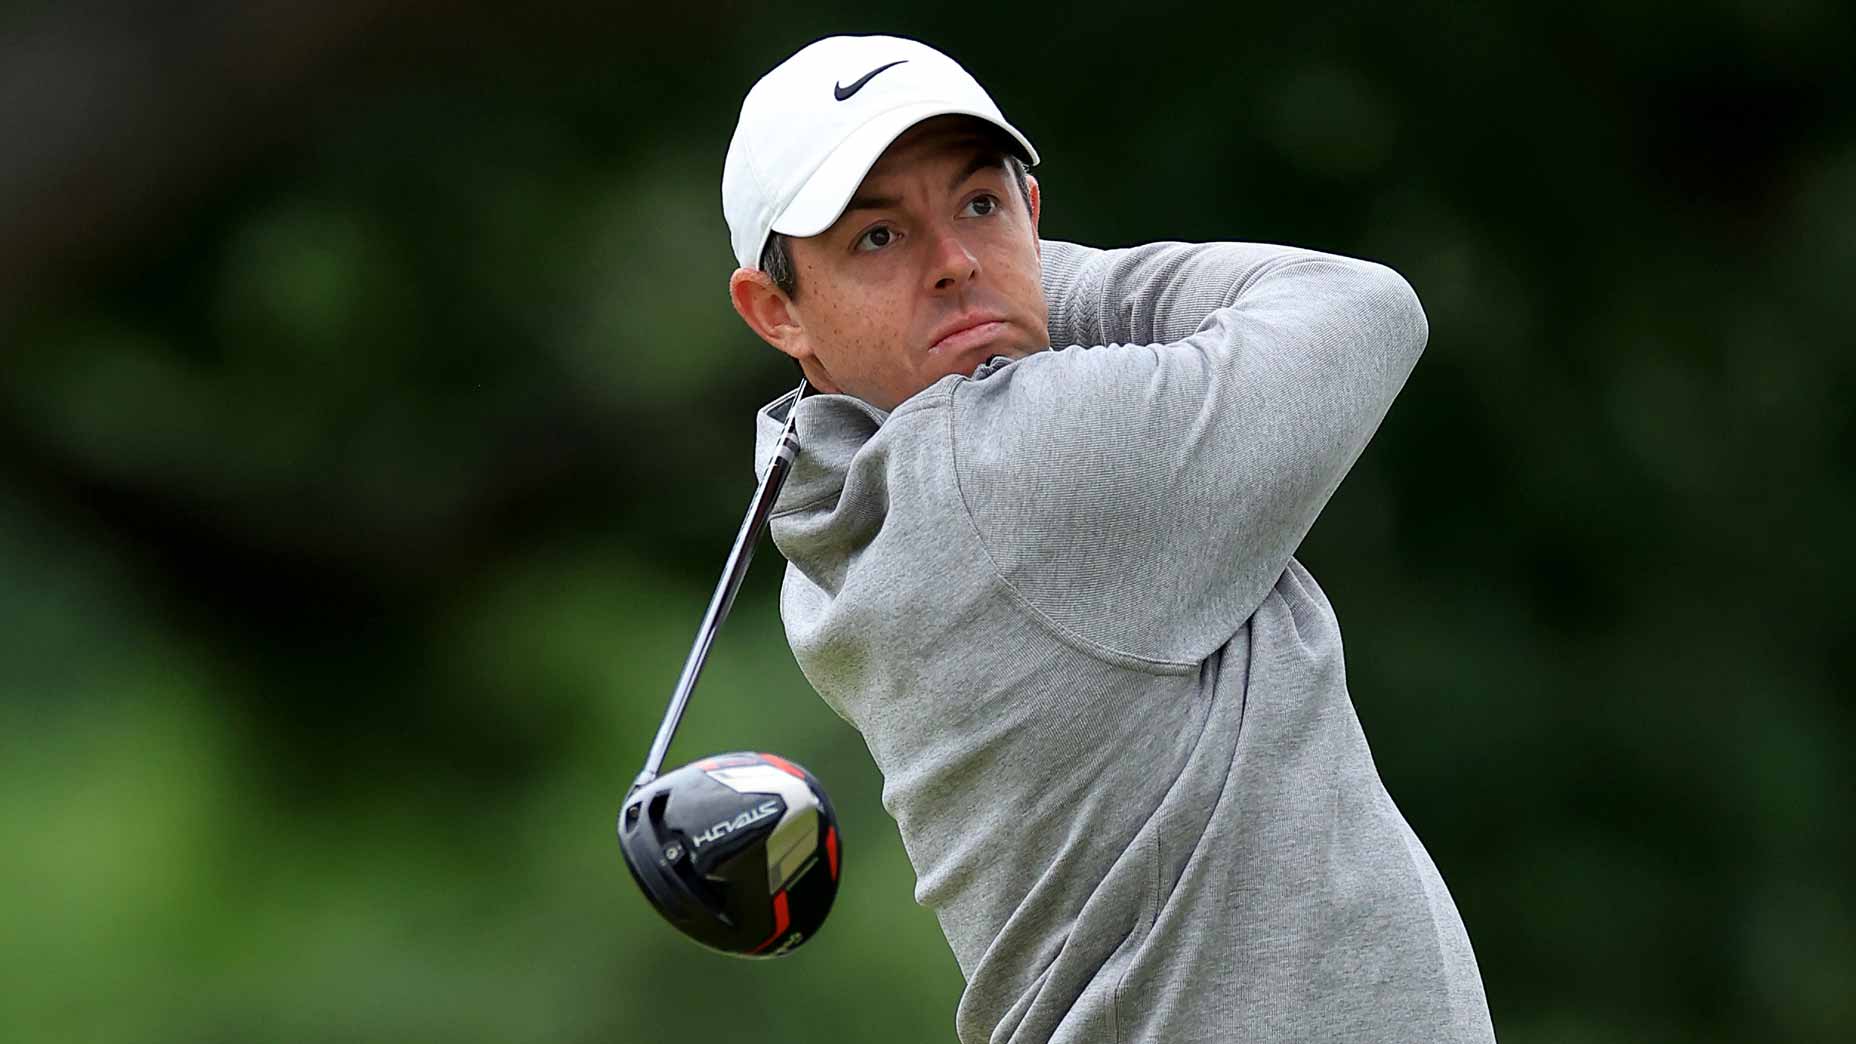 Rory McIlroy hits drive during 2022 U.S. Open